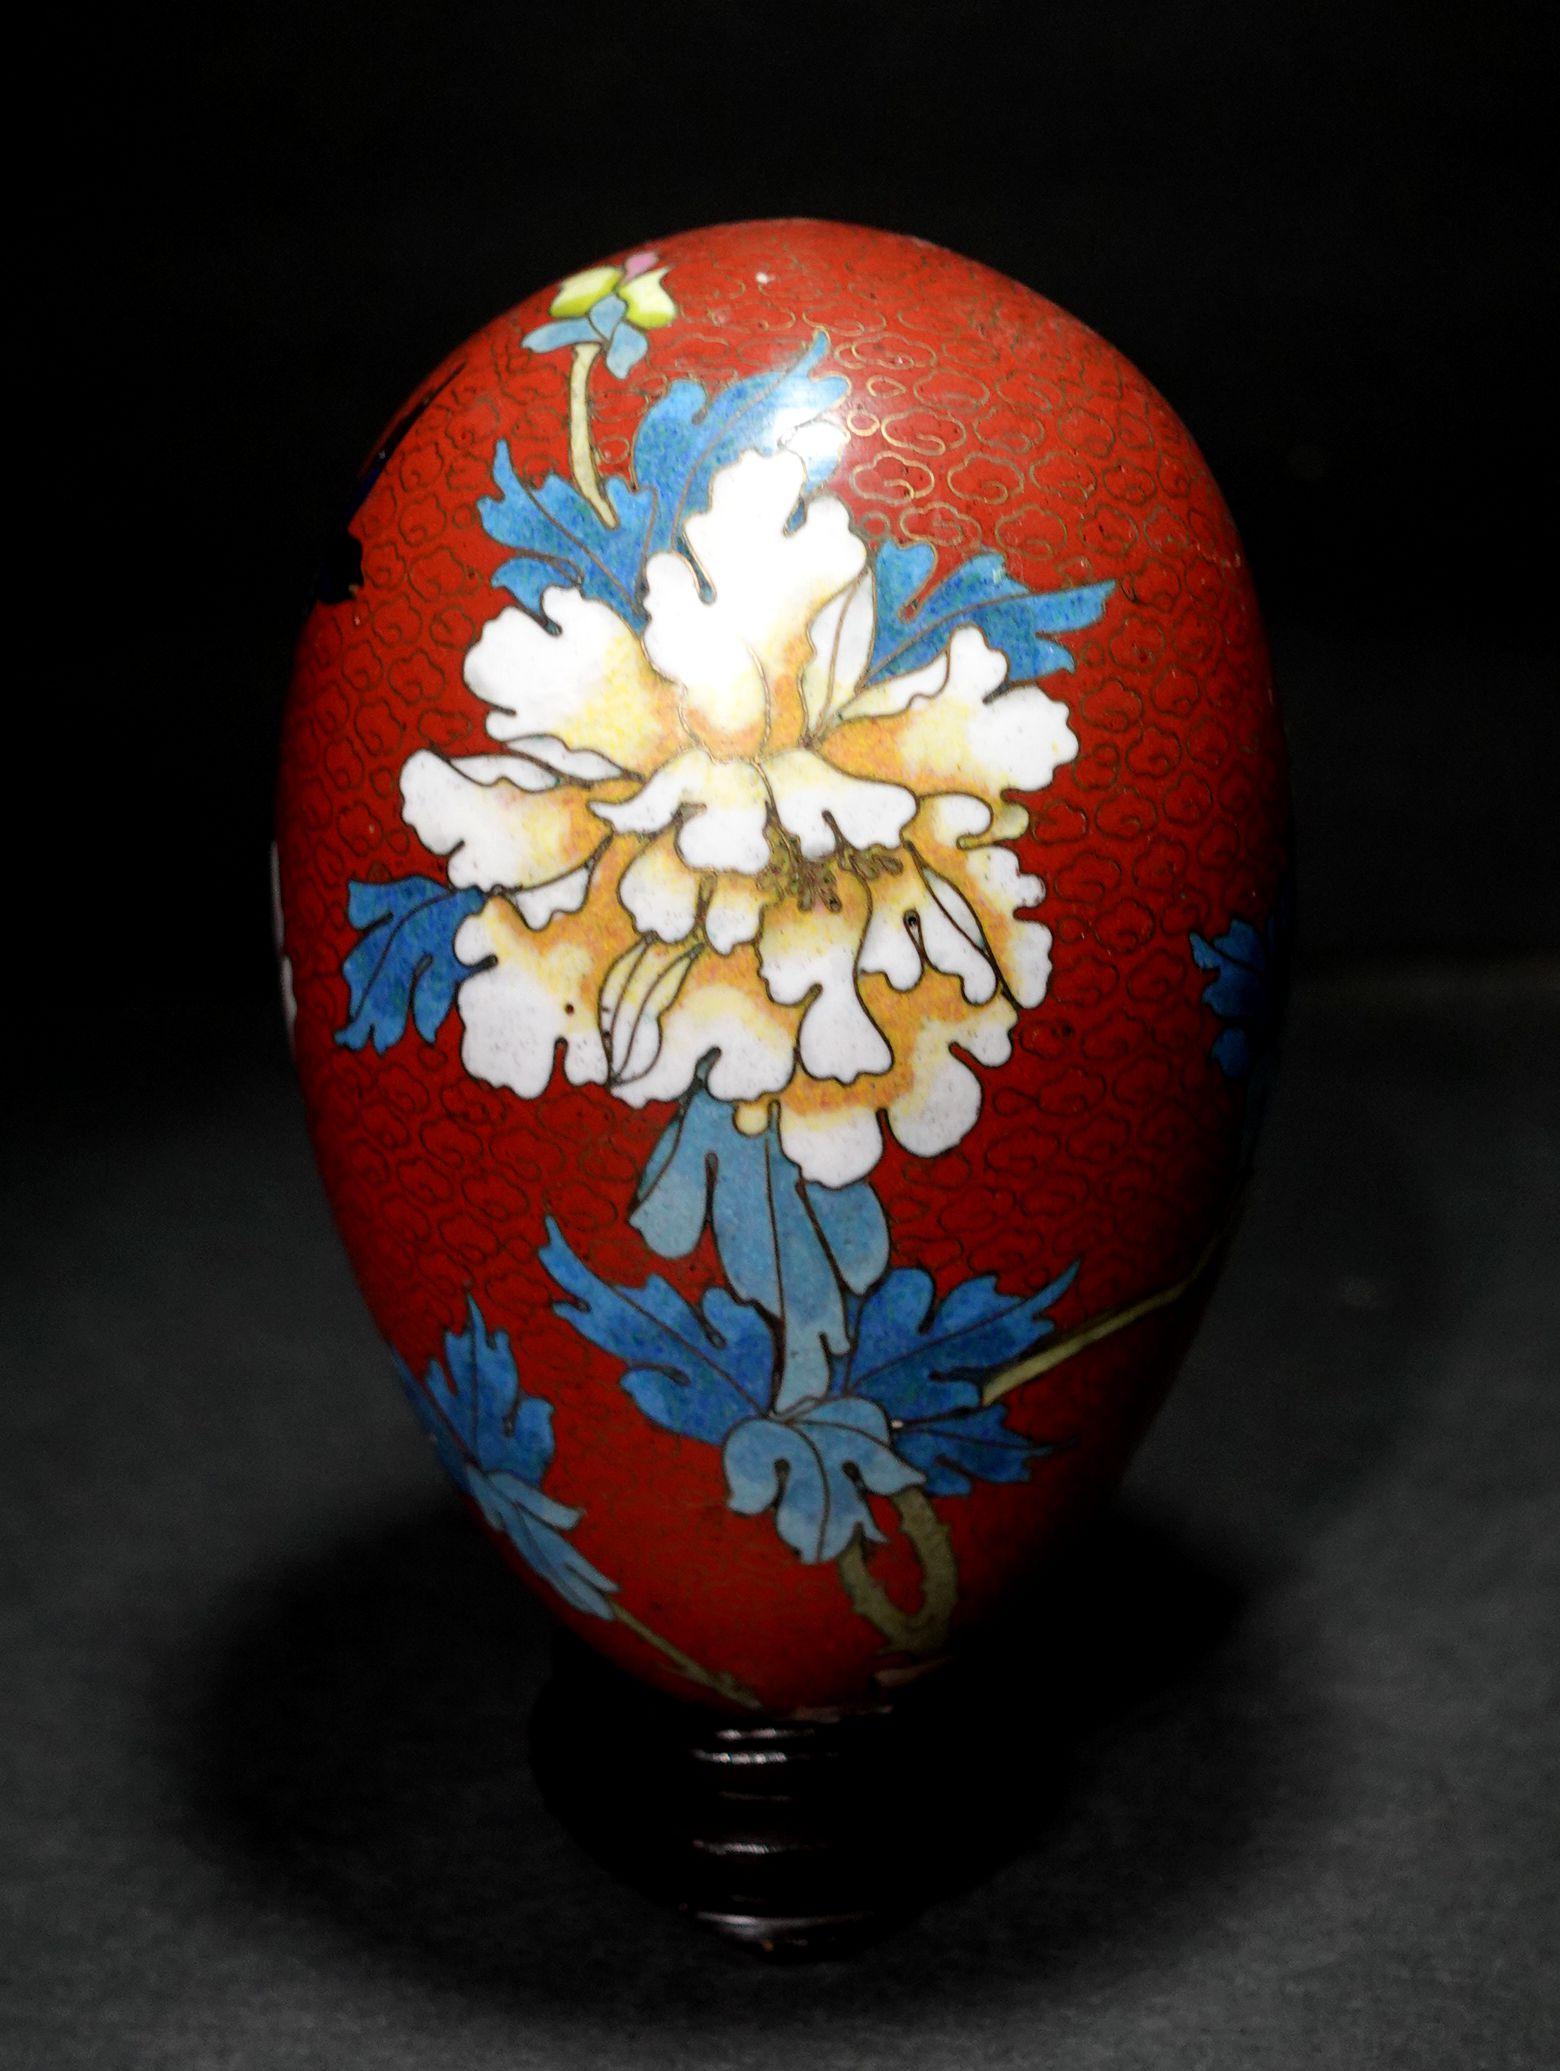 Presenting a large and beautiful Chinese cloisonné enamel egg depicting flowers and bird with a wood stand, early 20 century.